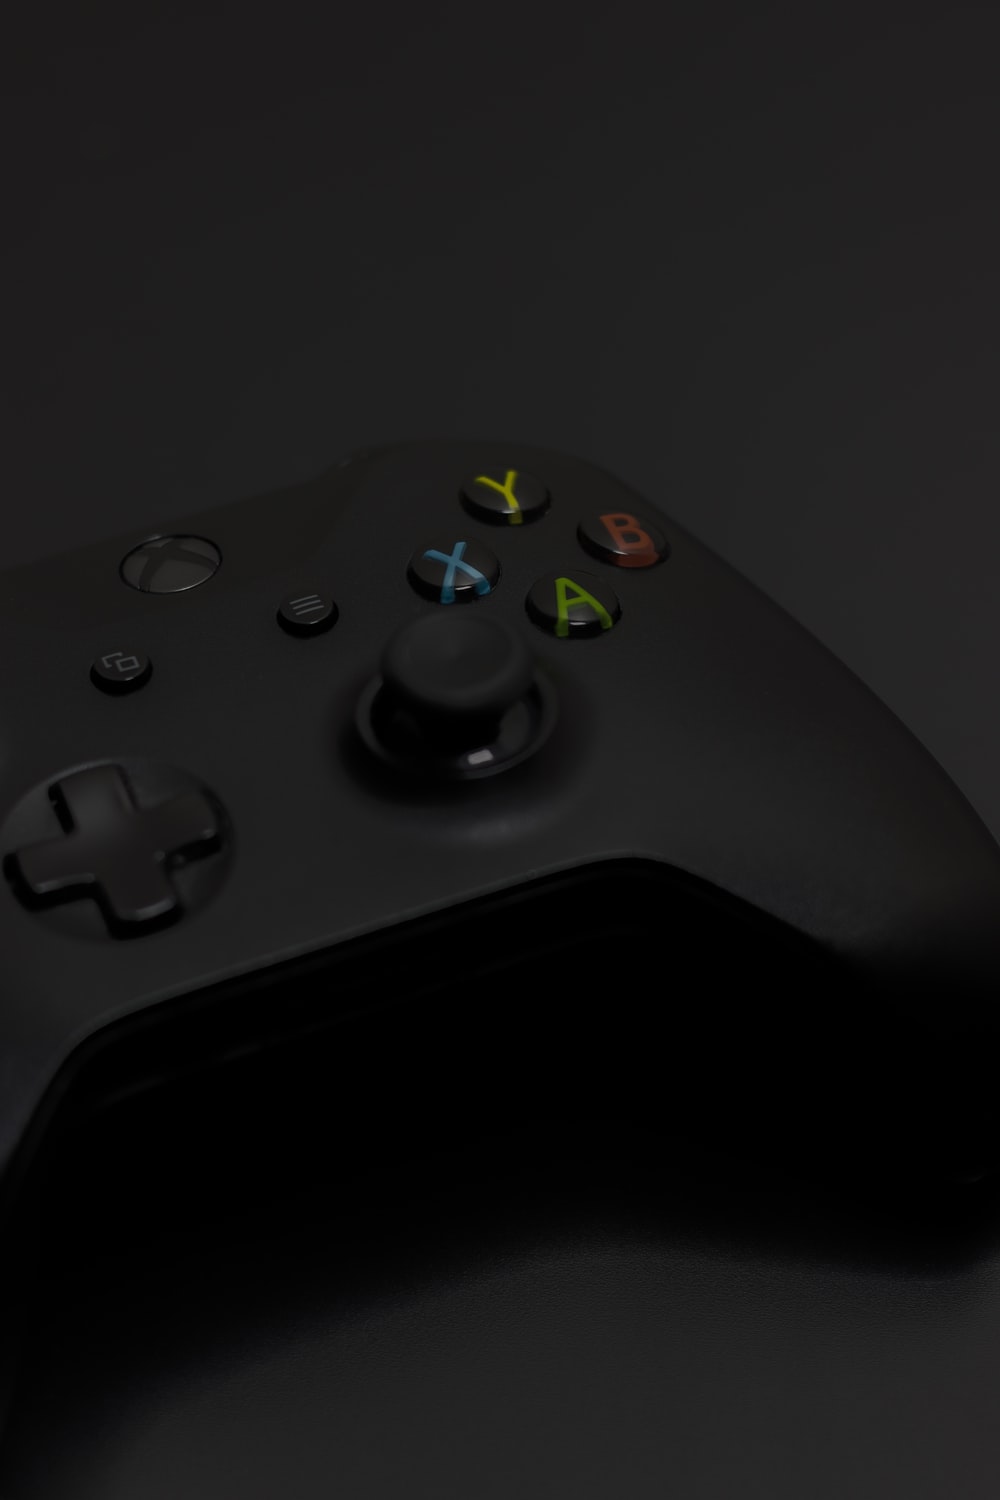 Xbox Controller Picture. Download Free Image